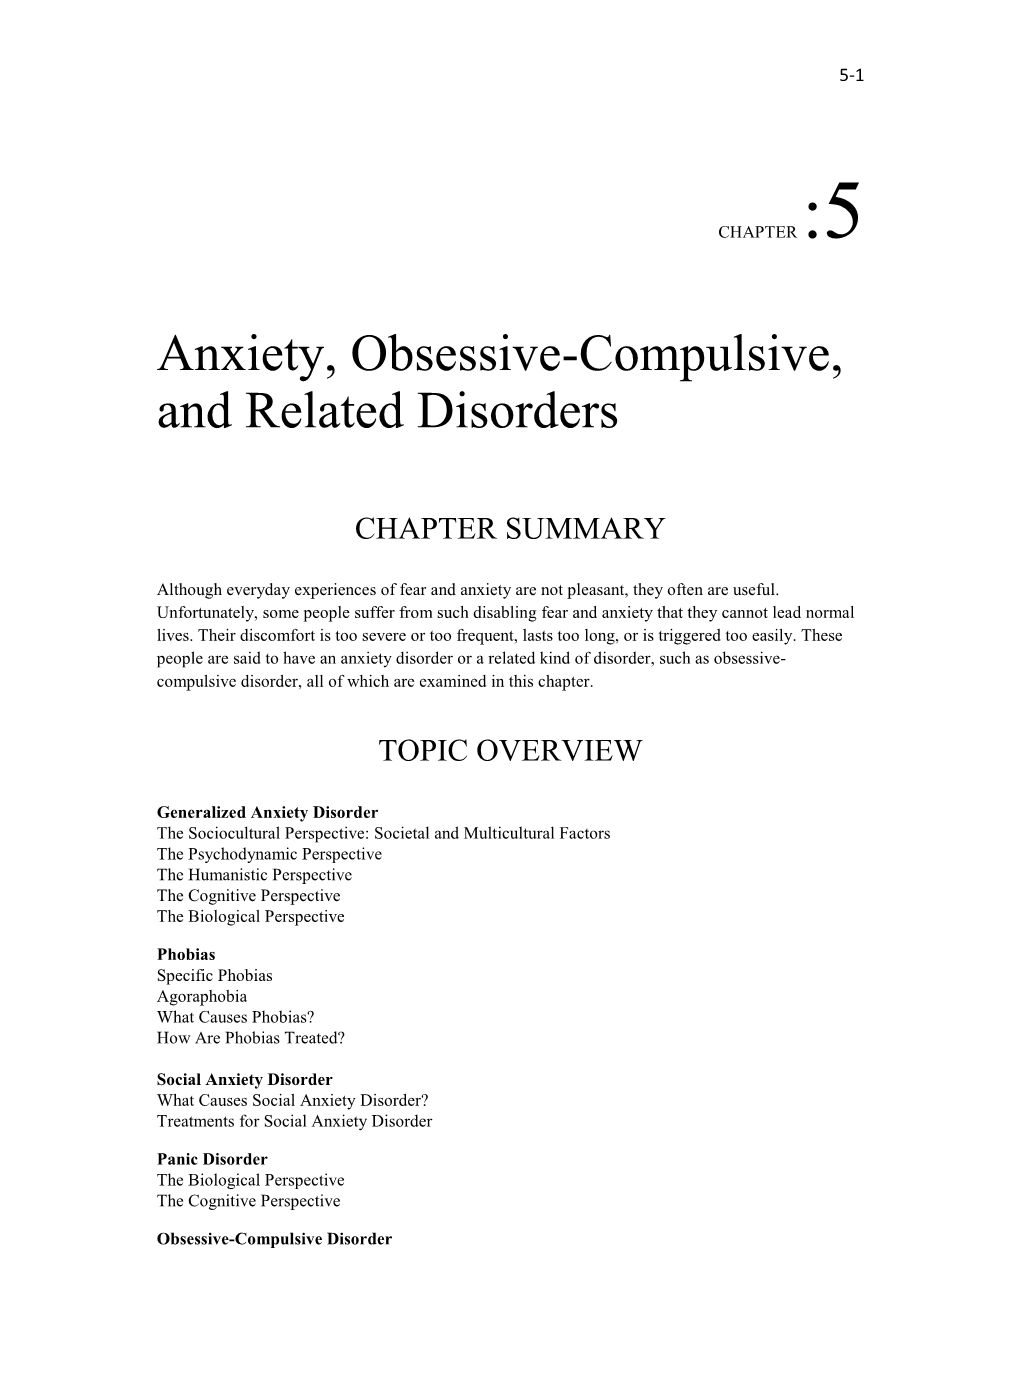 Anxiety, Obsessive-Compulsive, and Related Disorders